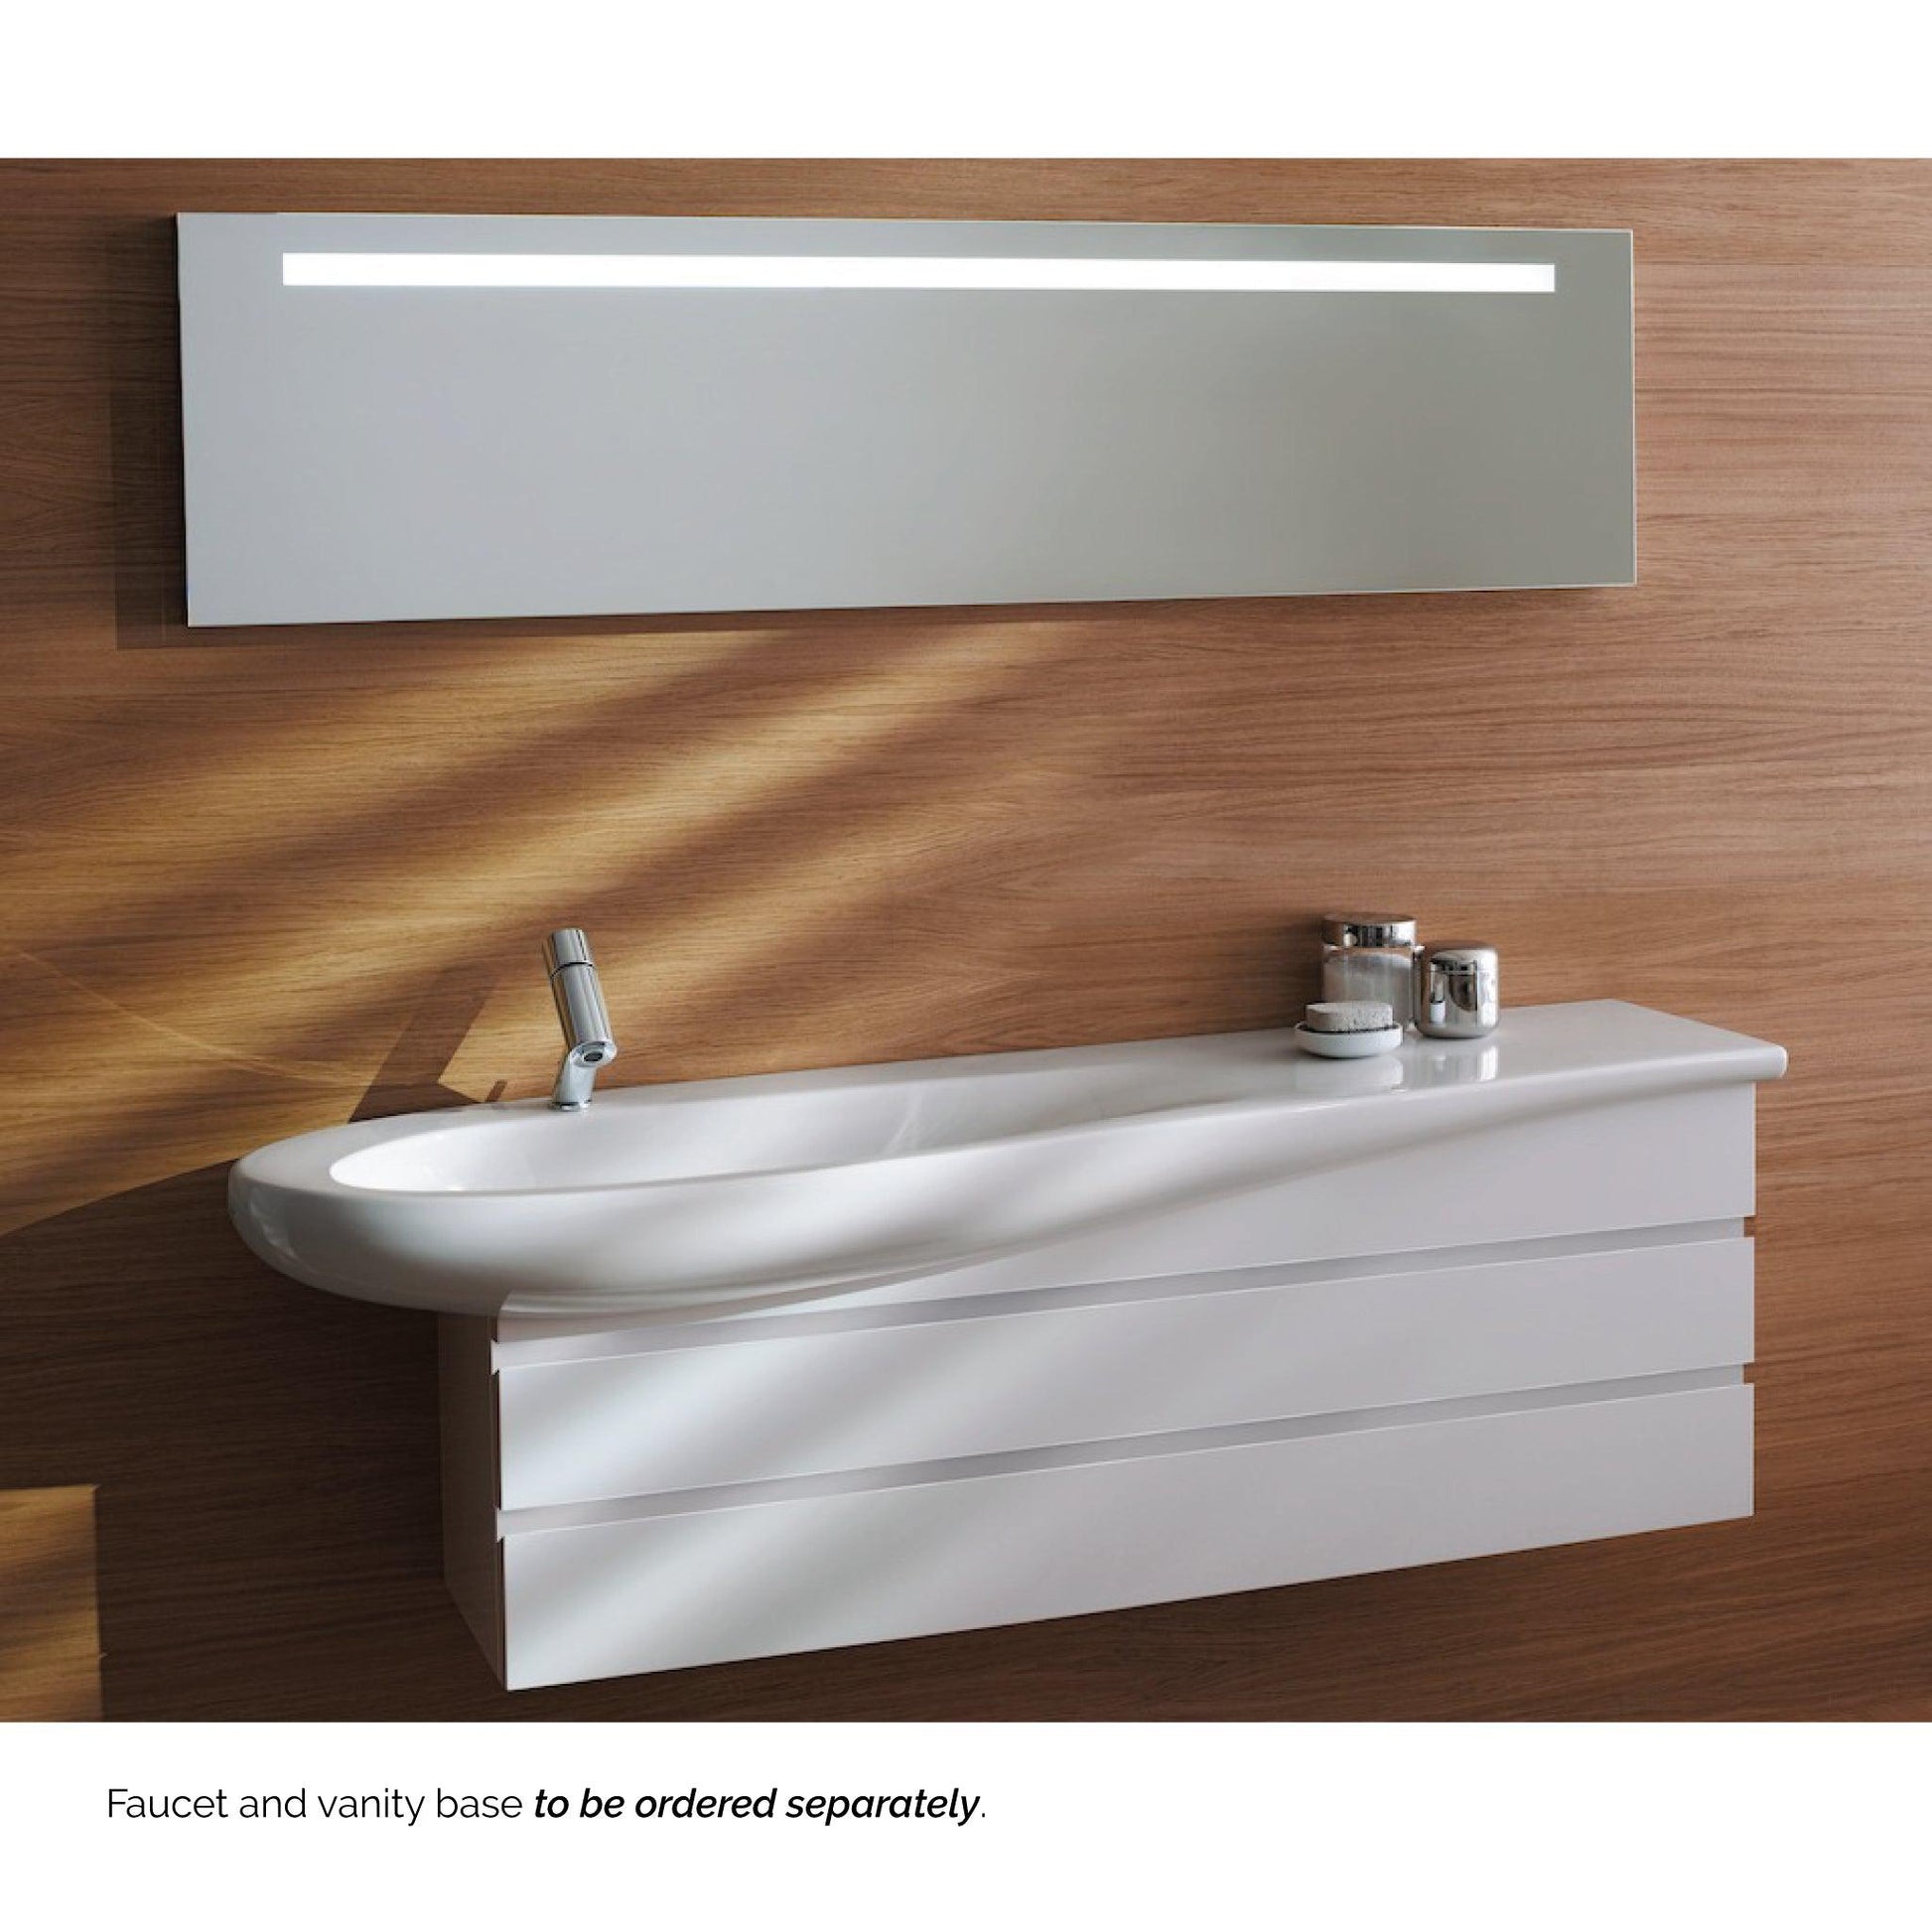 Laufen IlBagnoAlessi 47" x 20" White Wall-Mounted Shelf- Right Bathroom Sink With Faucet Hole